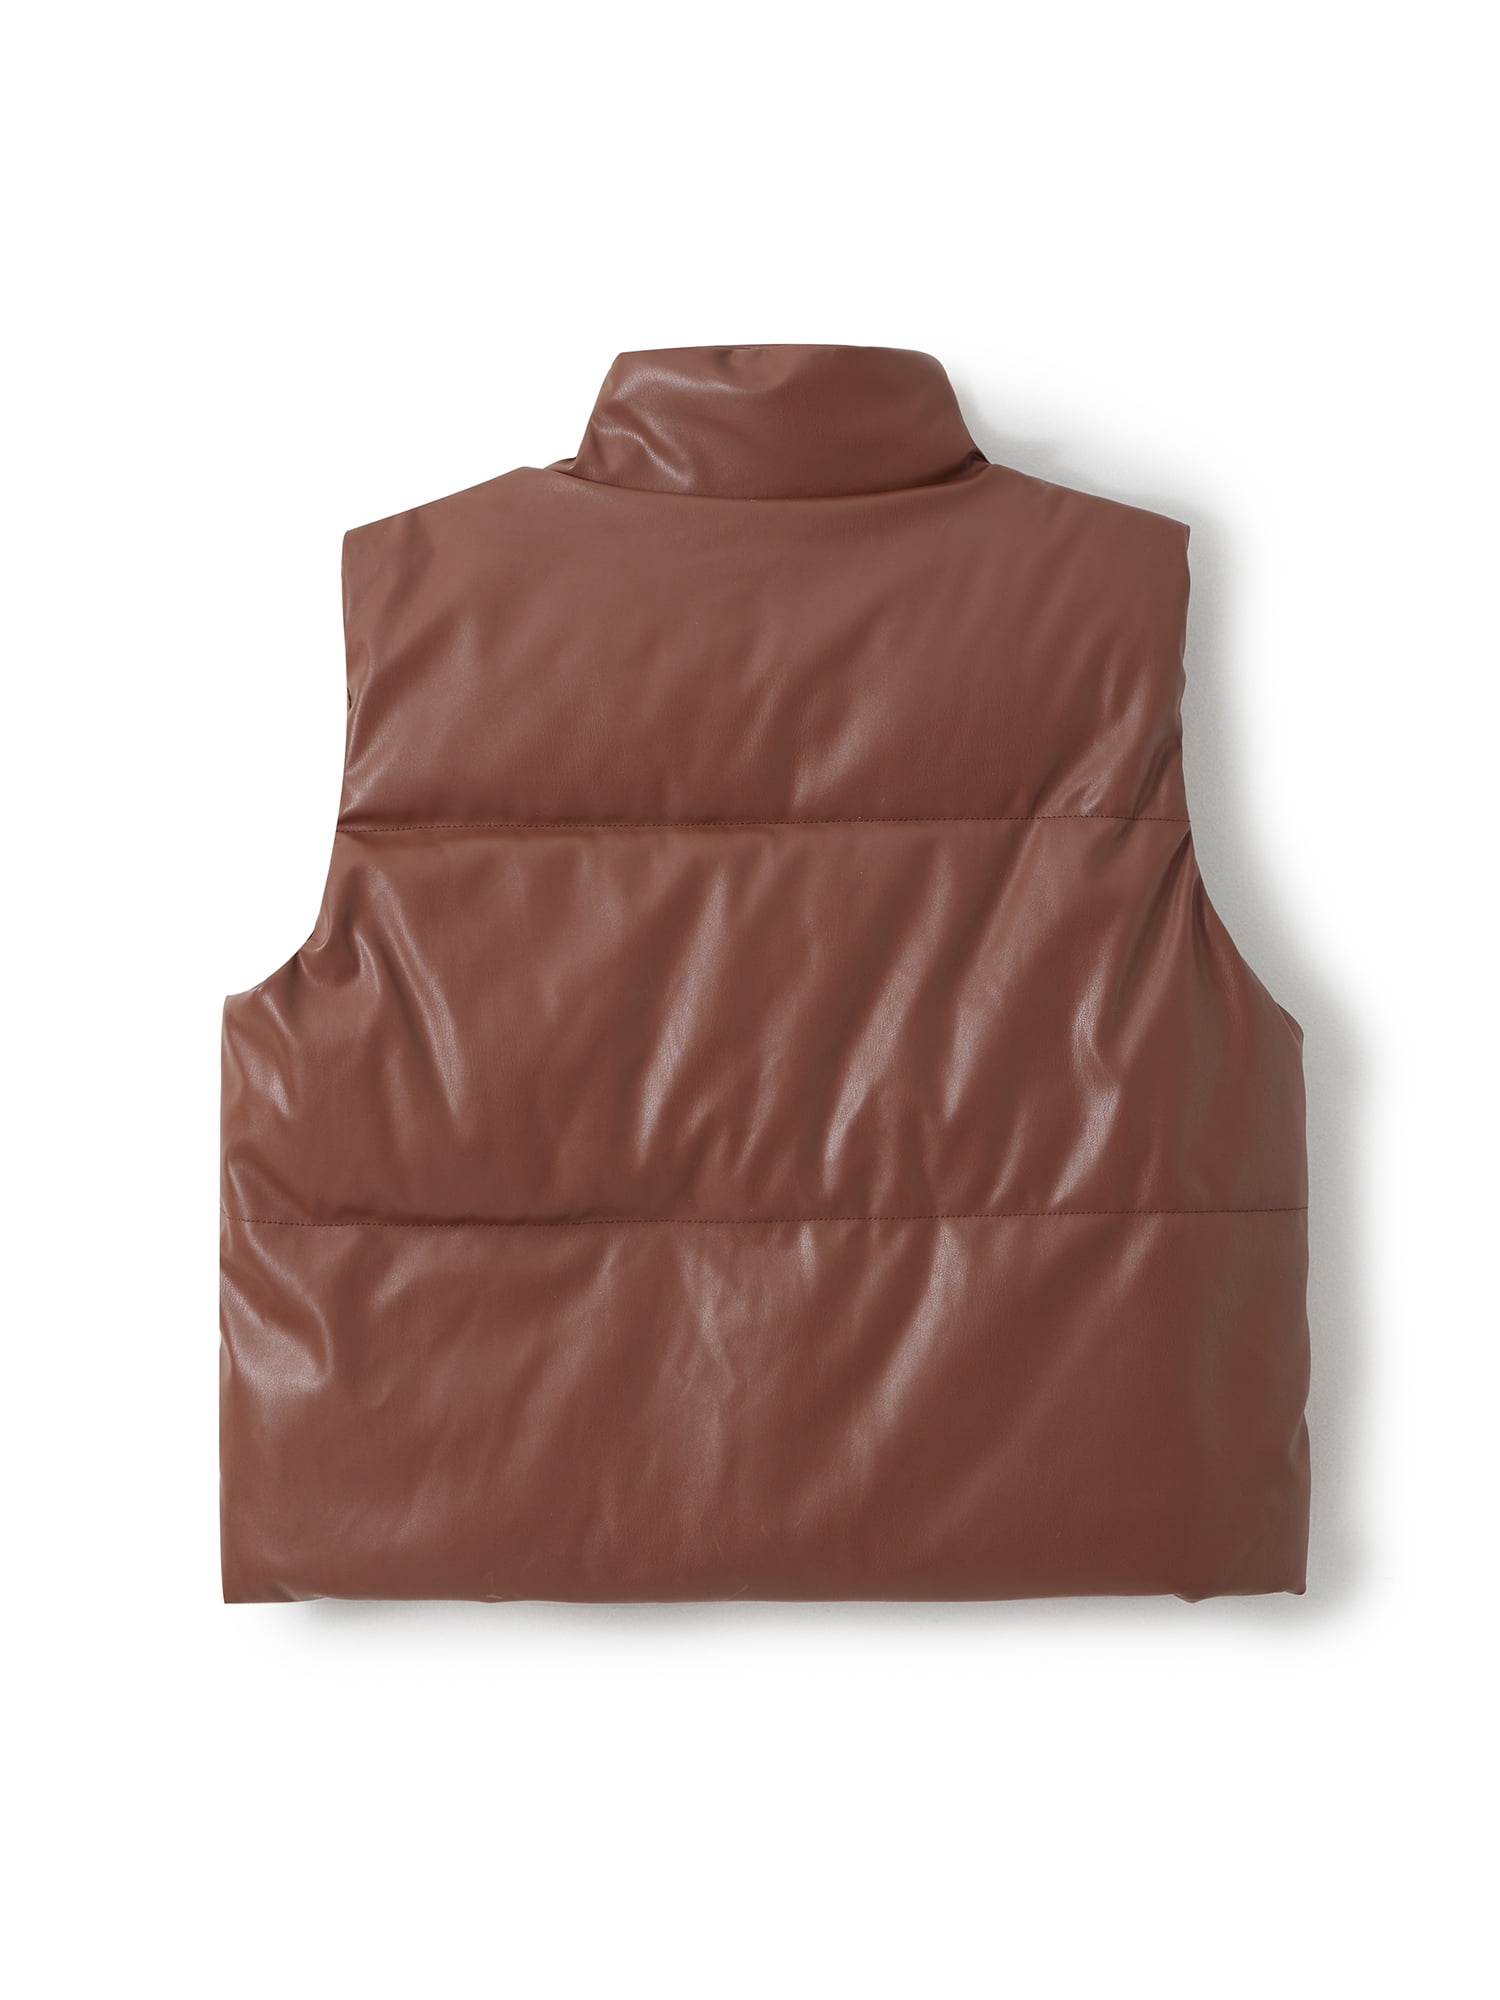 Listenwind Women's Quilted Faux Leather Crop Vest